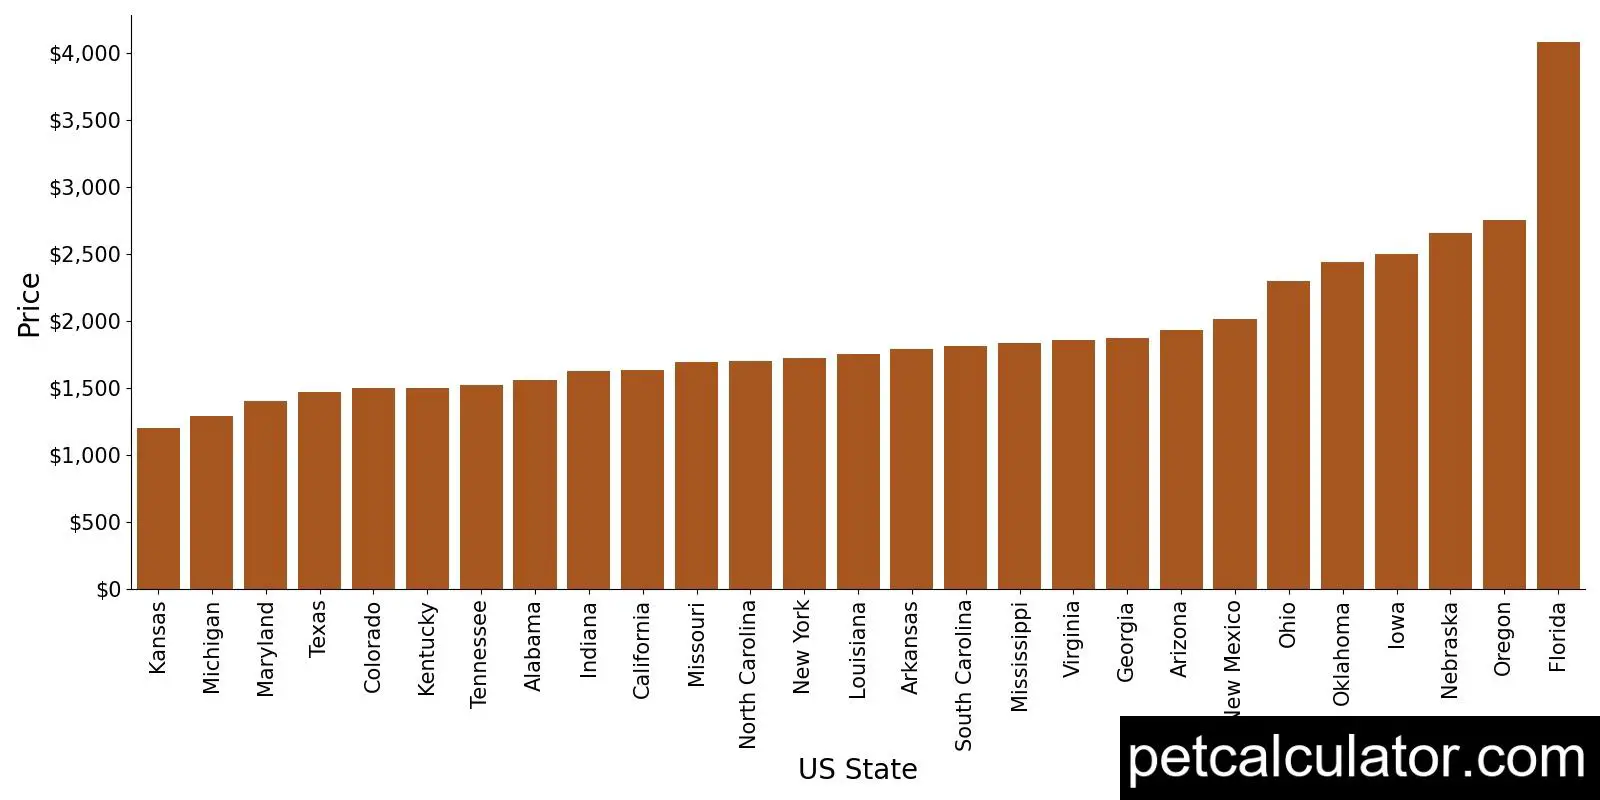 Price of Pekingese by US State 